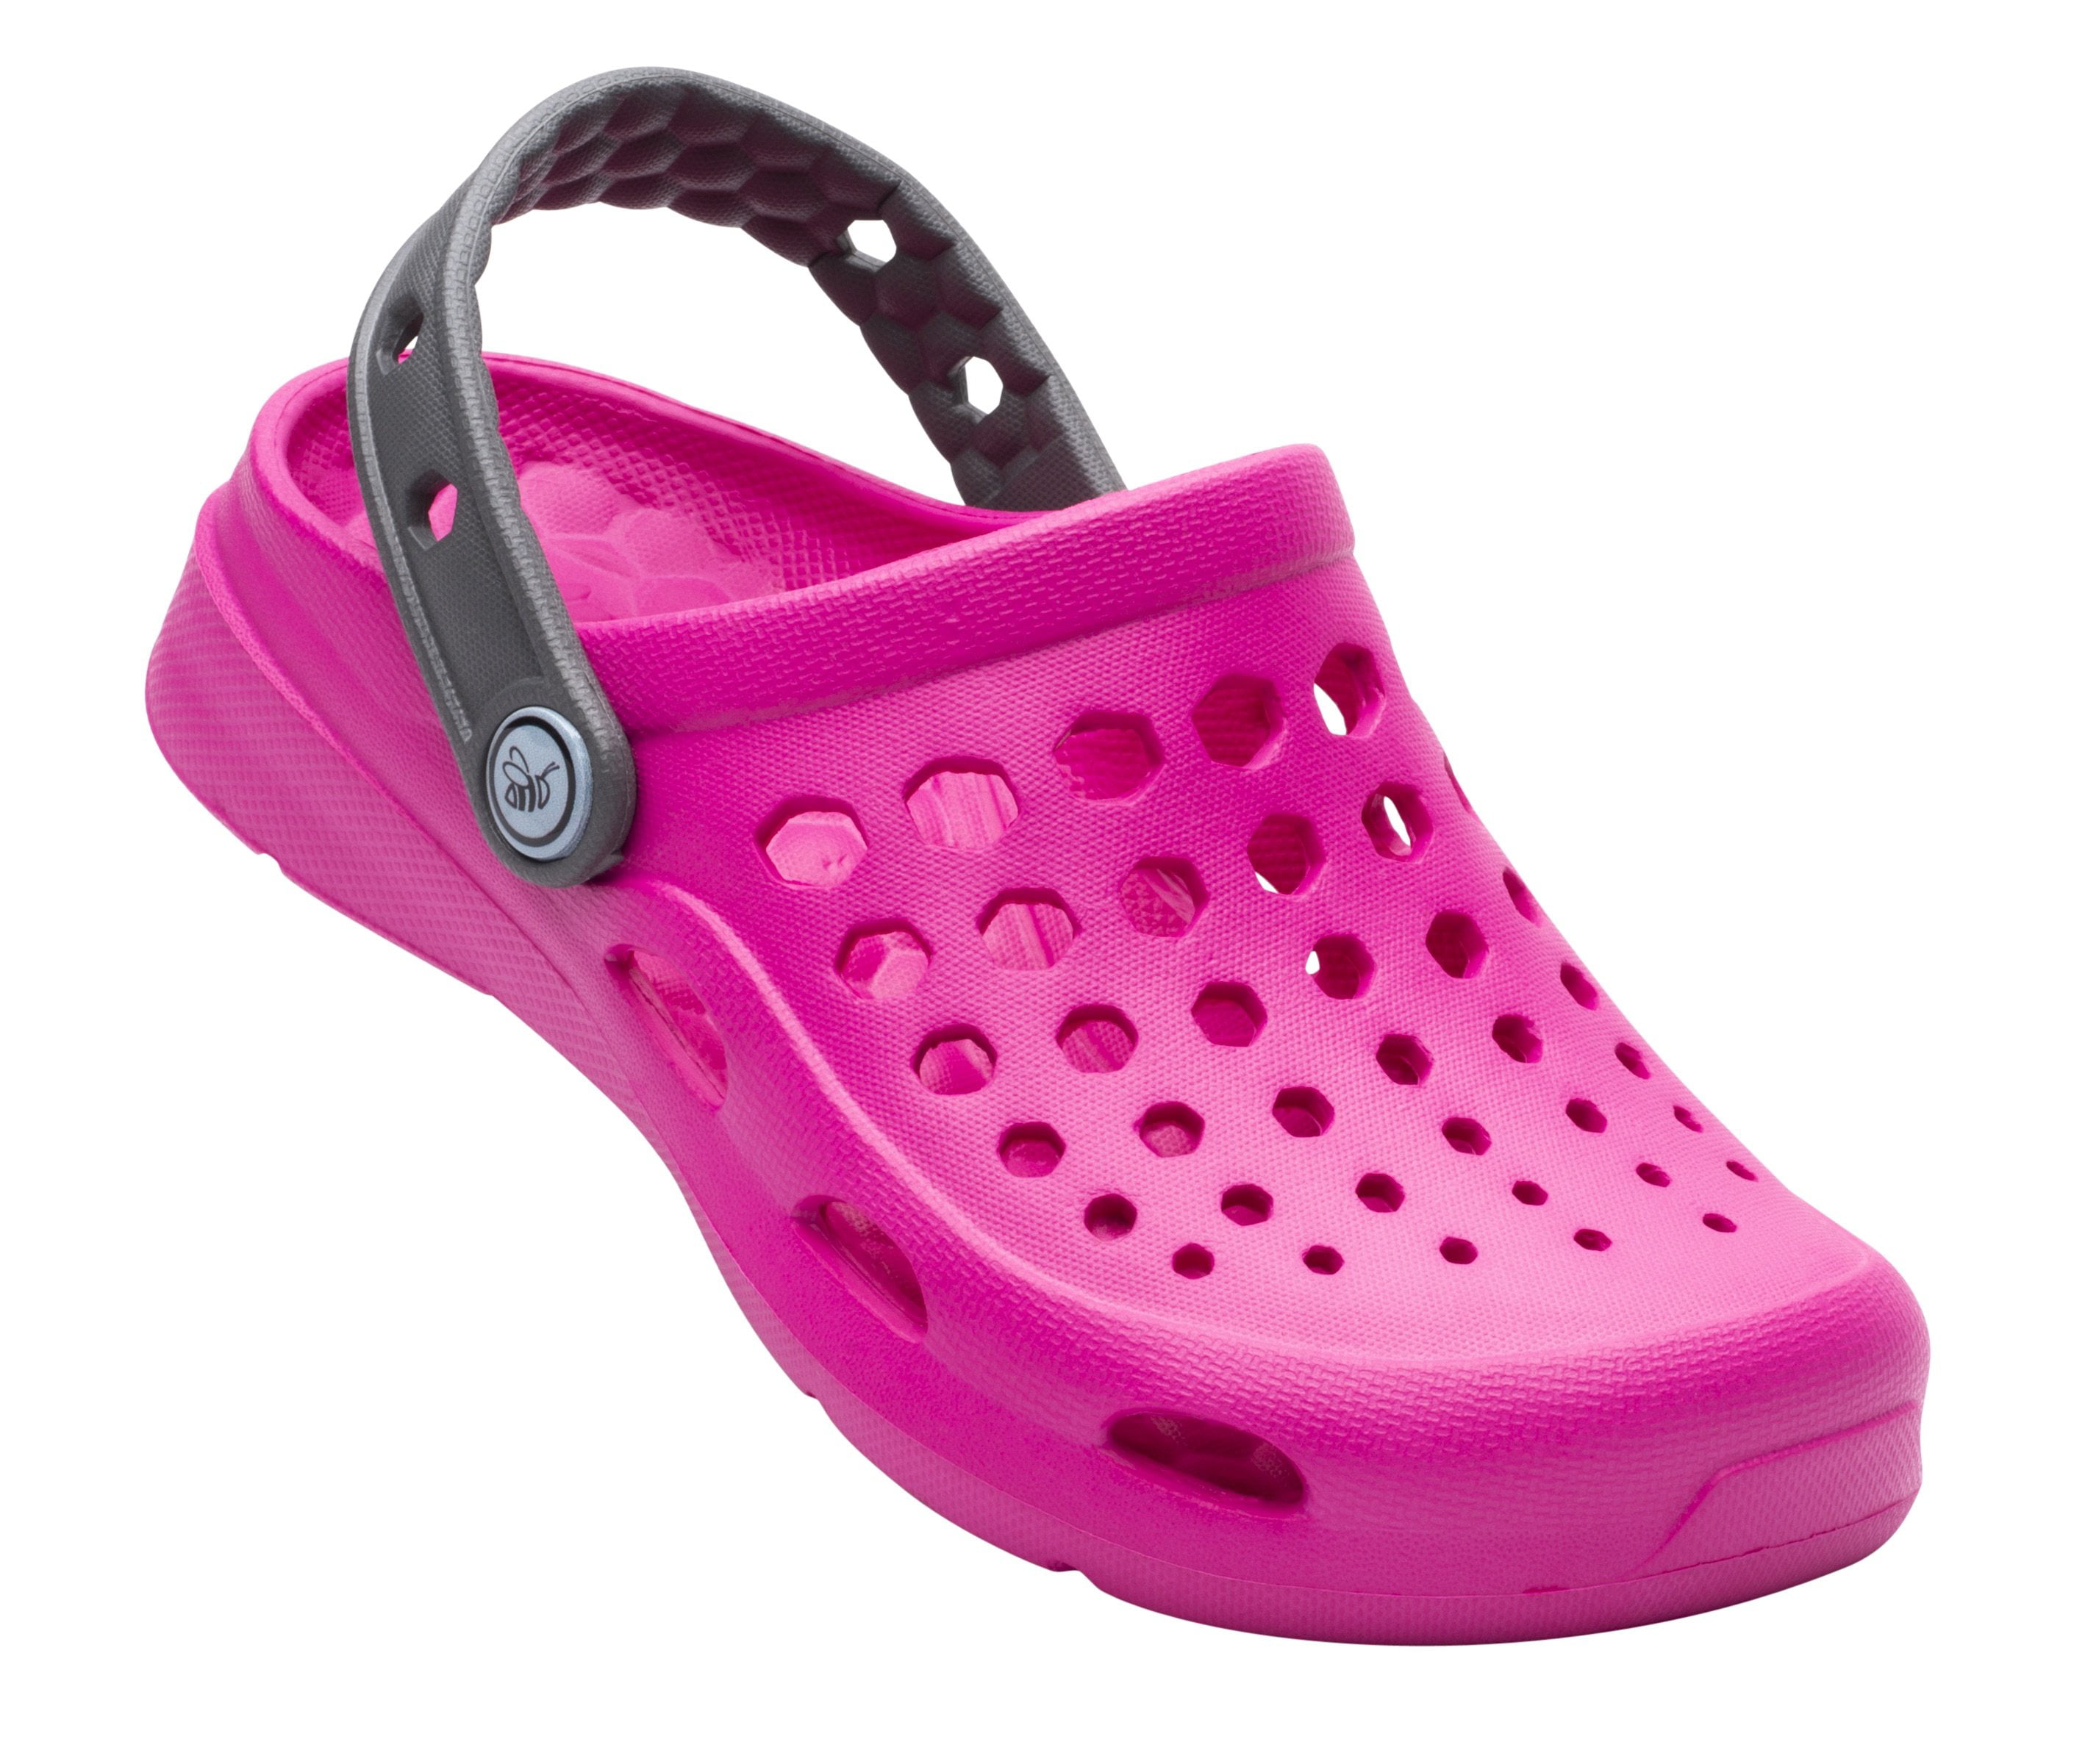 Joybees - Joybees Active Clog Kids | Comfortable and Easy to Clean ...